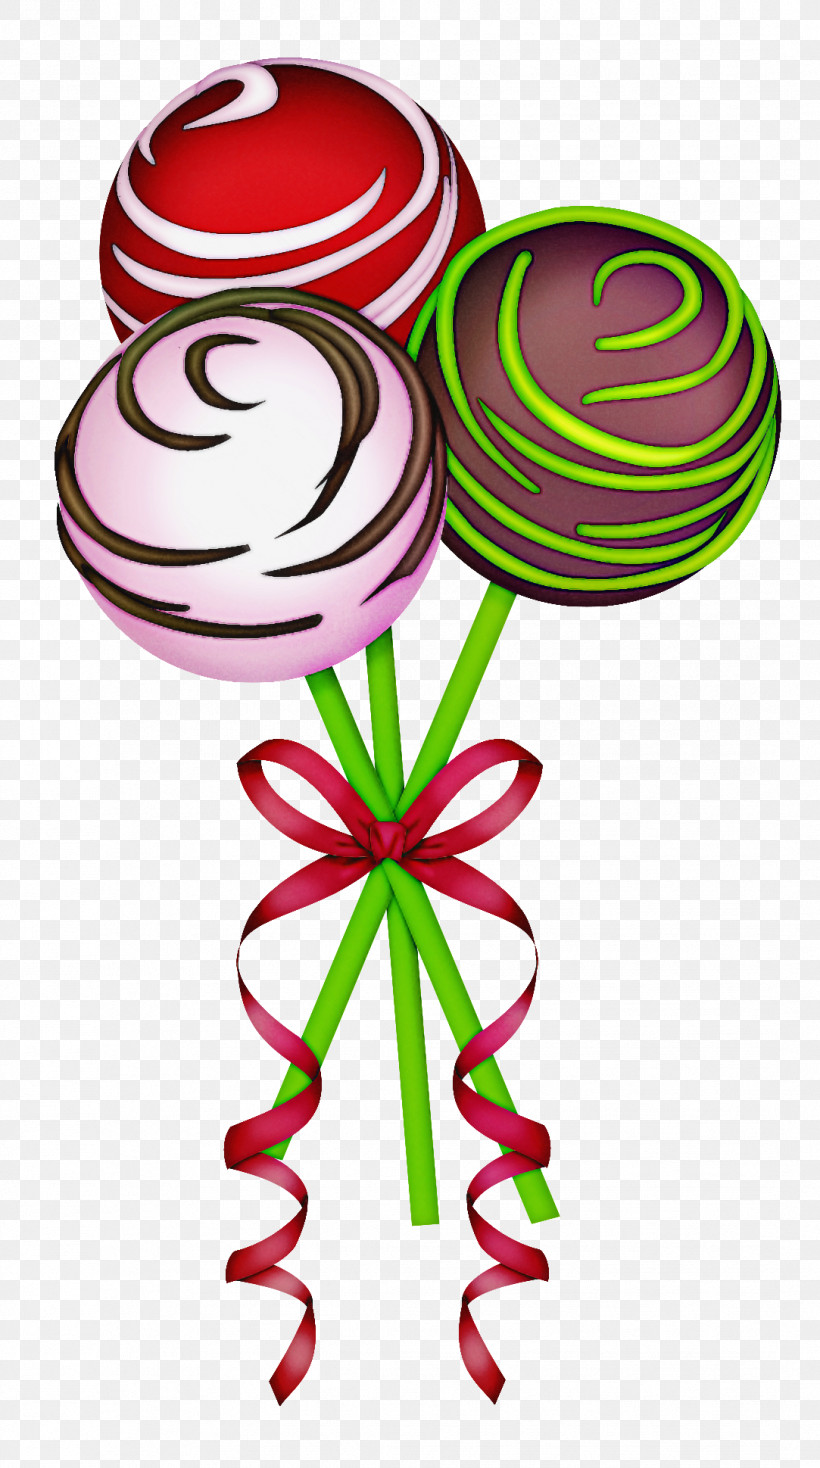 Lollipop Stick Candy Confectionery Candy, PNG, 1083x1939px, Lollipop, Candy, Confectionery, Stick Candy Download Free